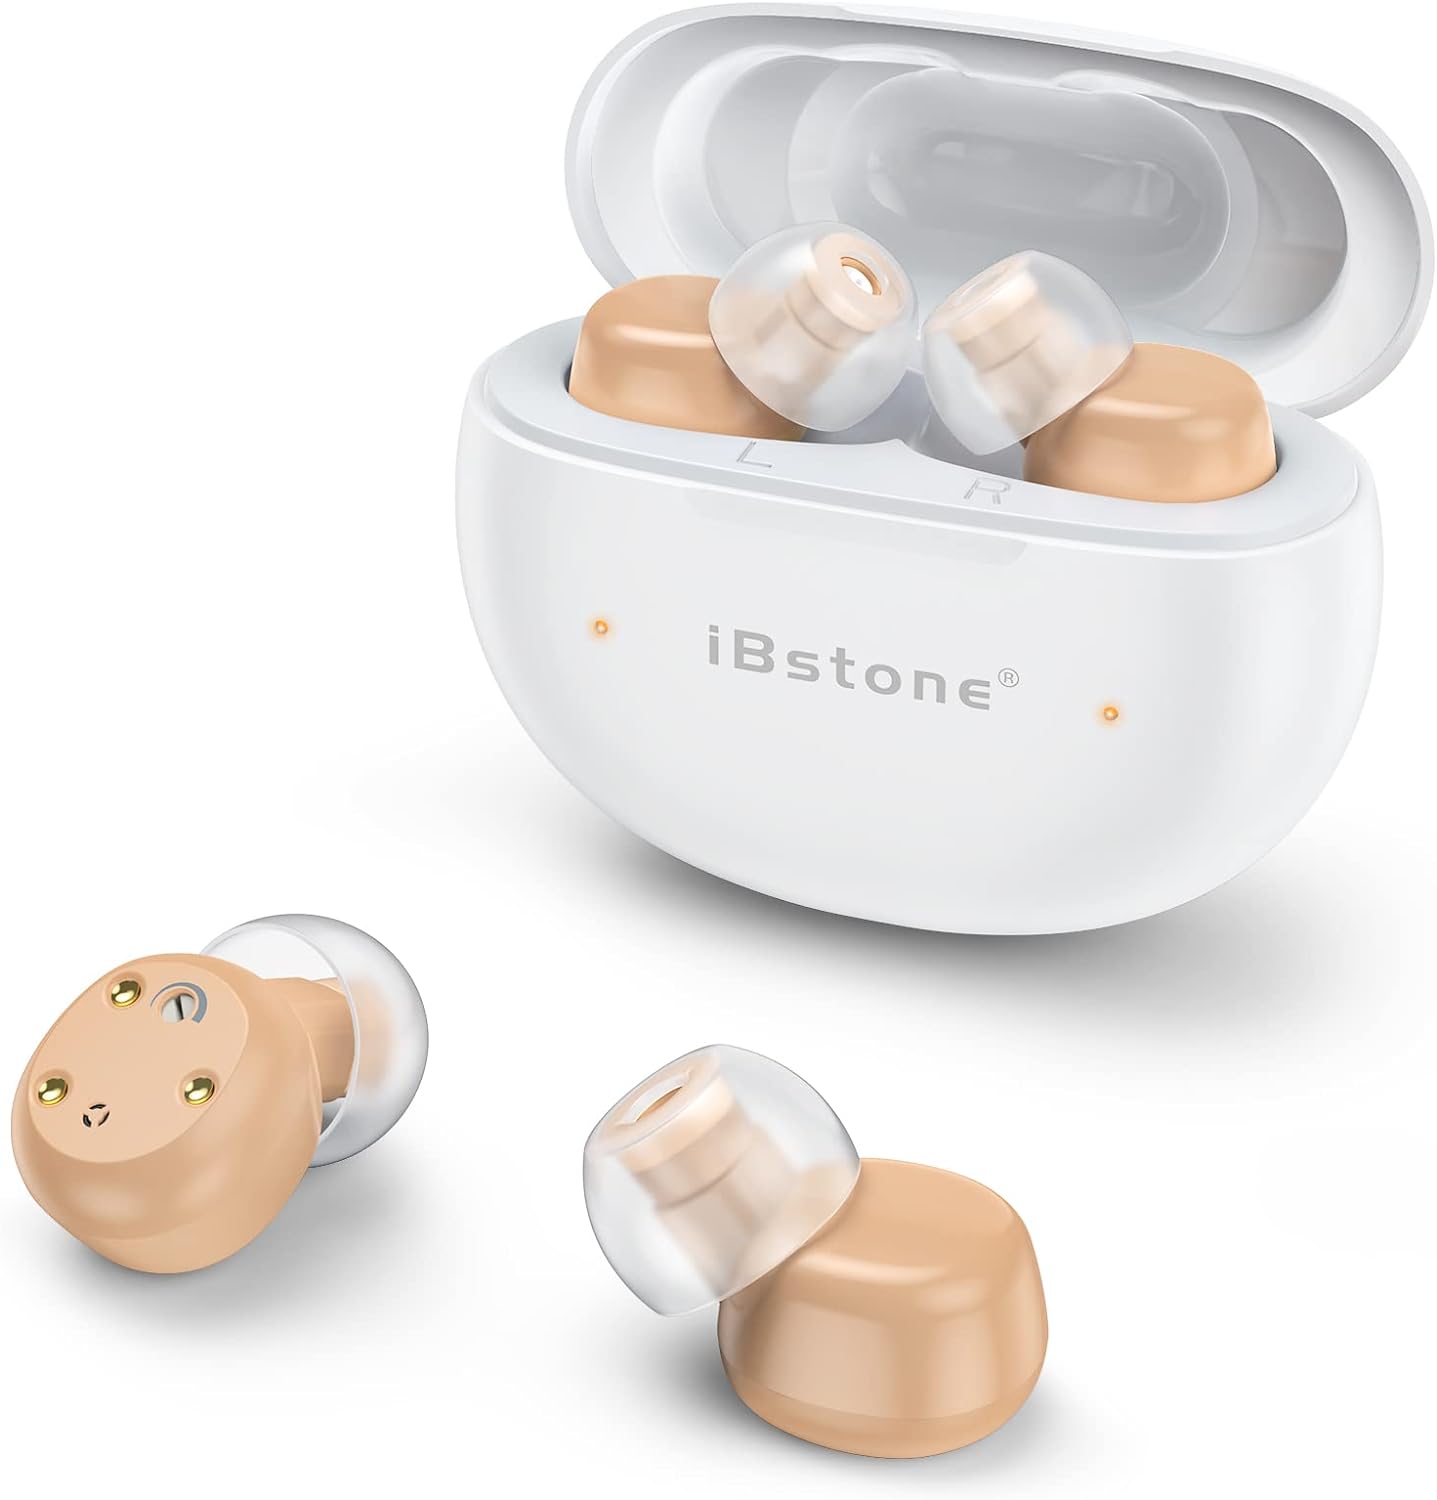 iBstone Mini-B(single device, without charging case)